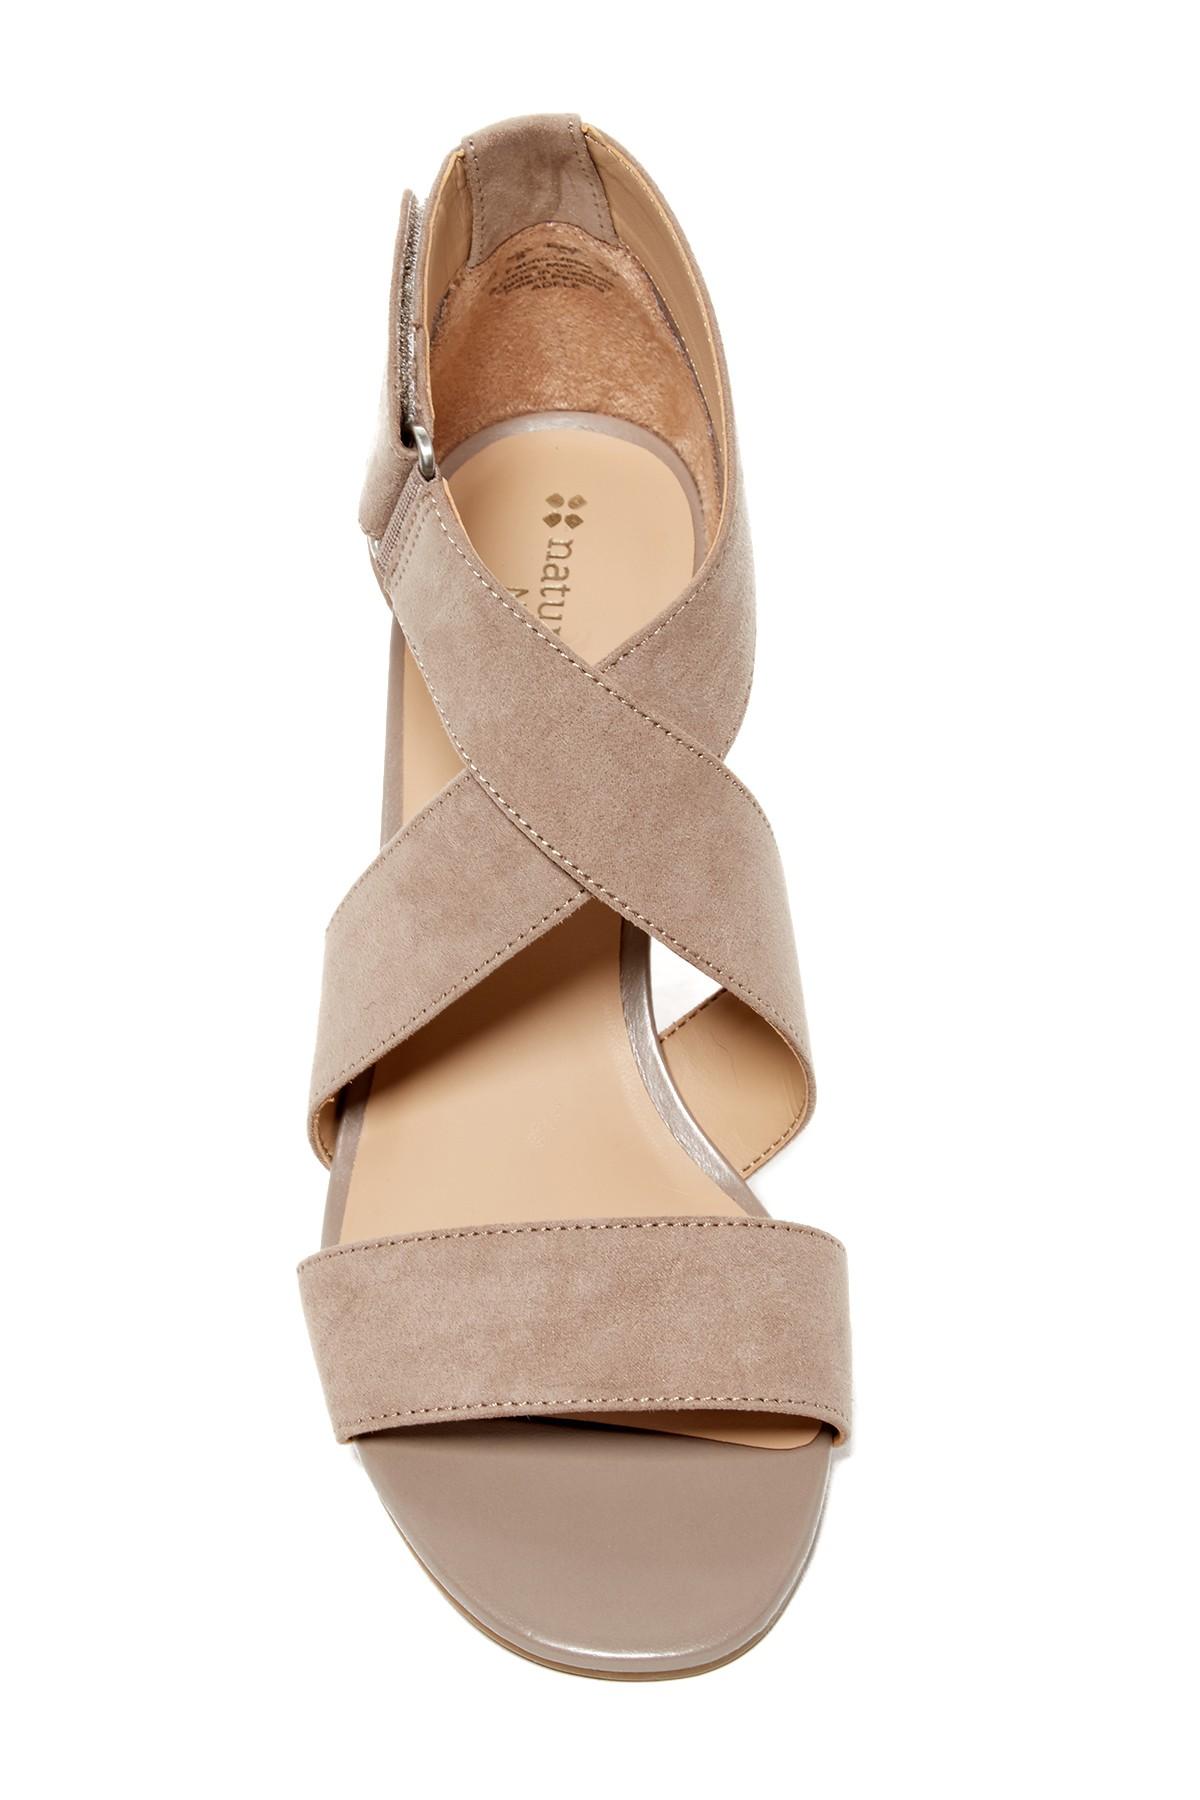 Naturalizer Adele Block Heel Sandal - Wide Width Available in Brown | Lyst